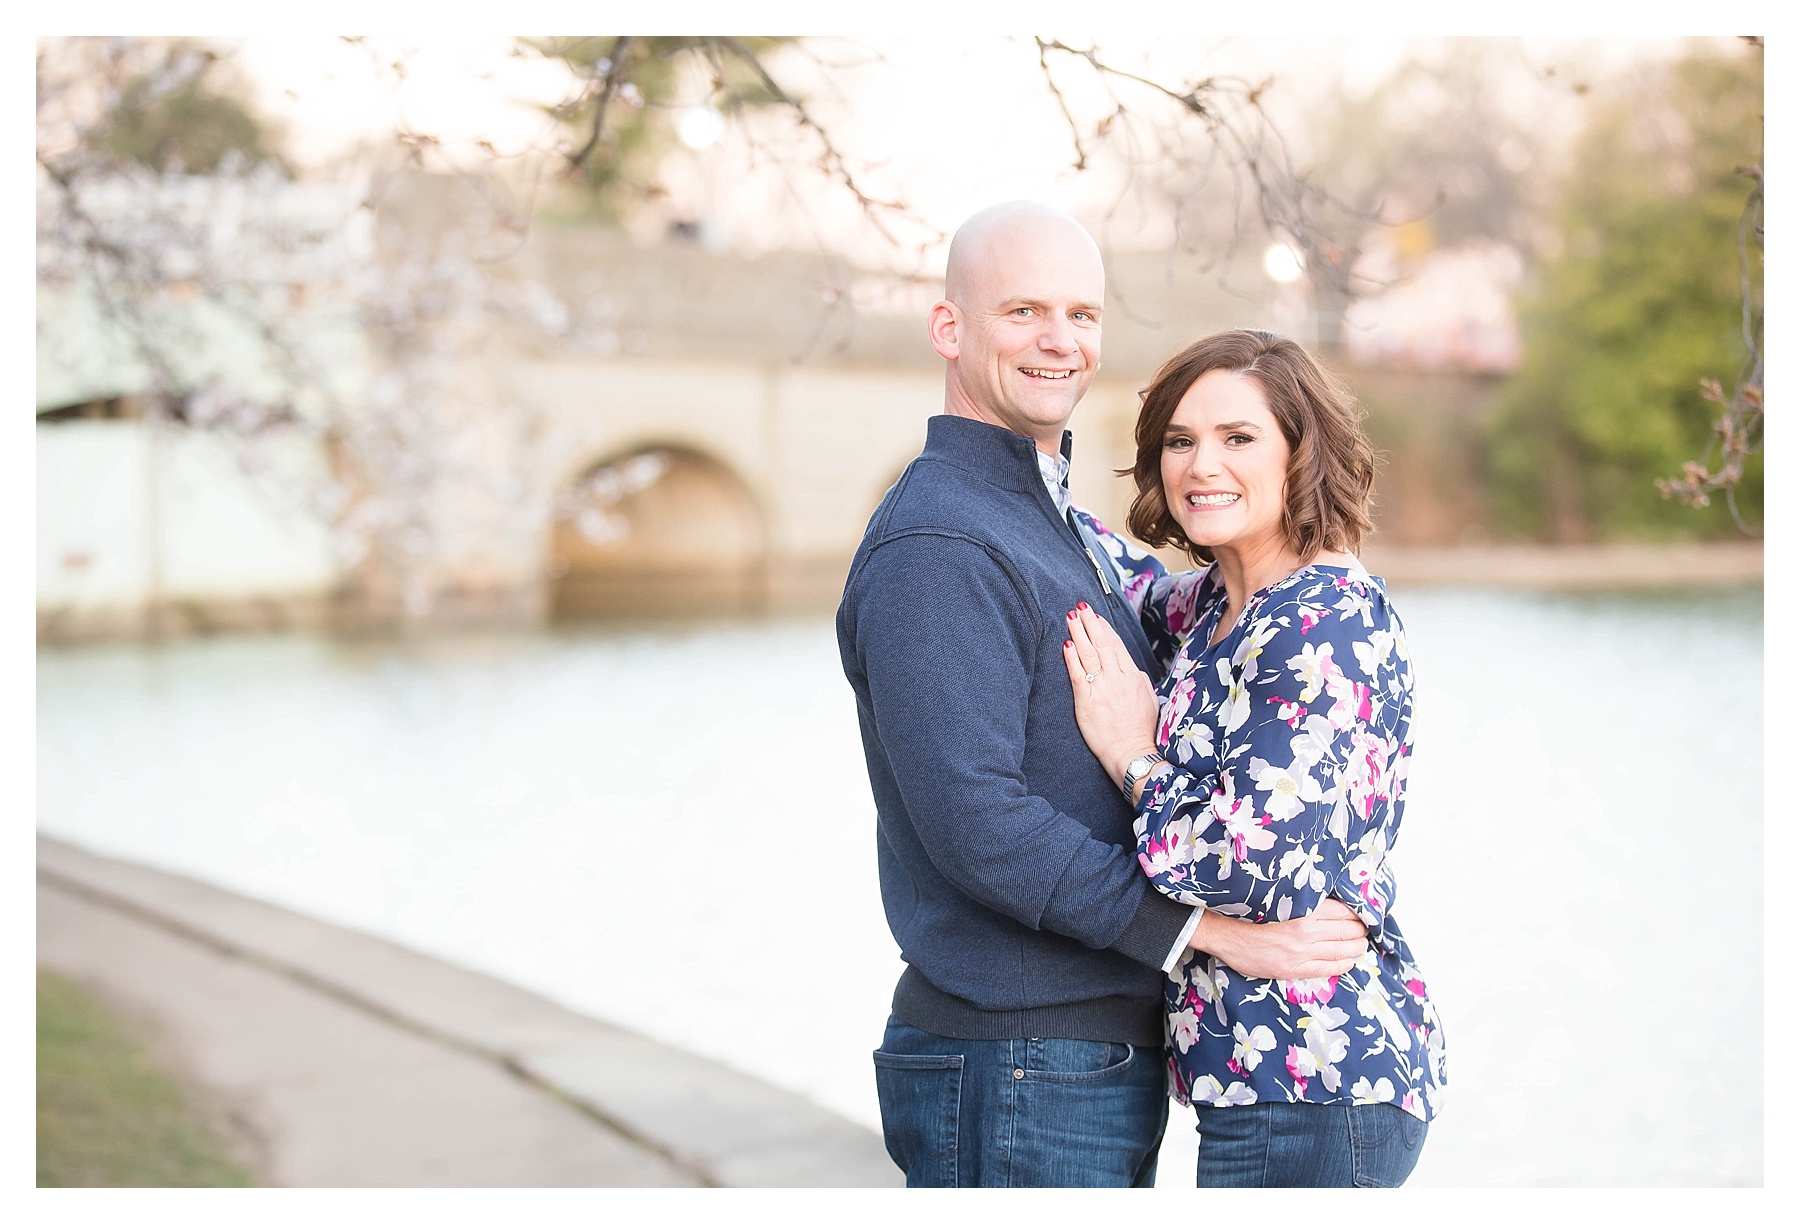 Candice Adelle Photography DC Destination Wedding Photographer Cherry Blossom Engagment Session_0007.jpg